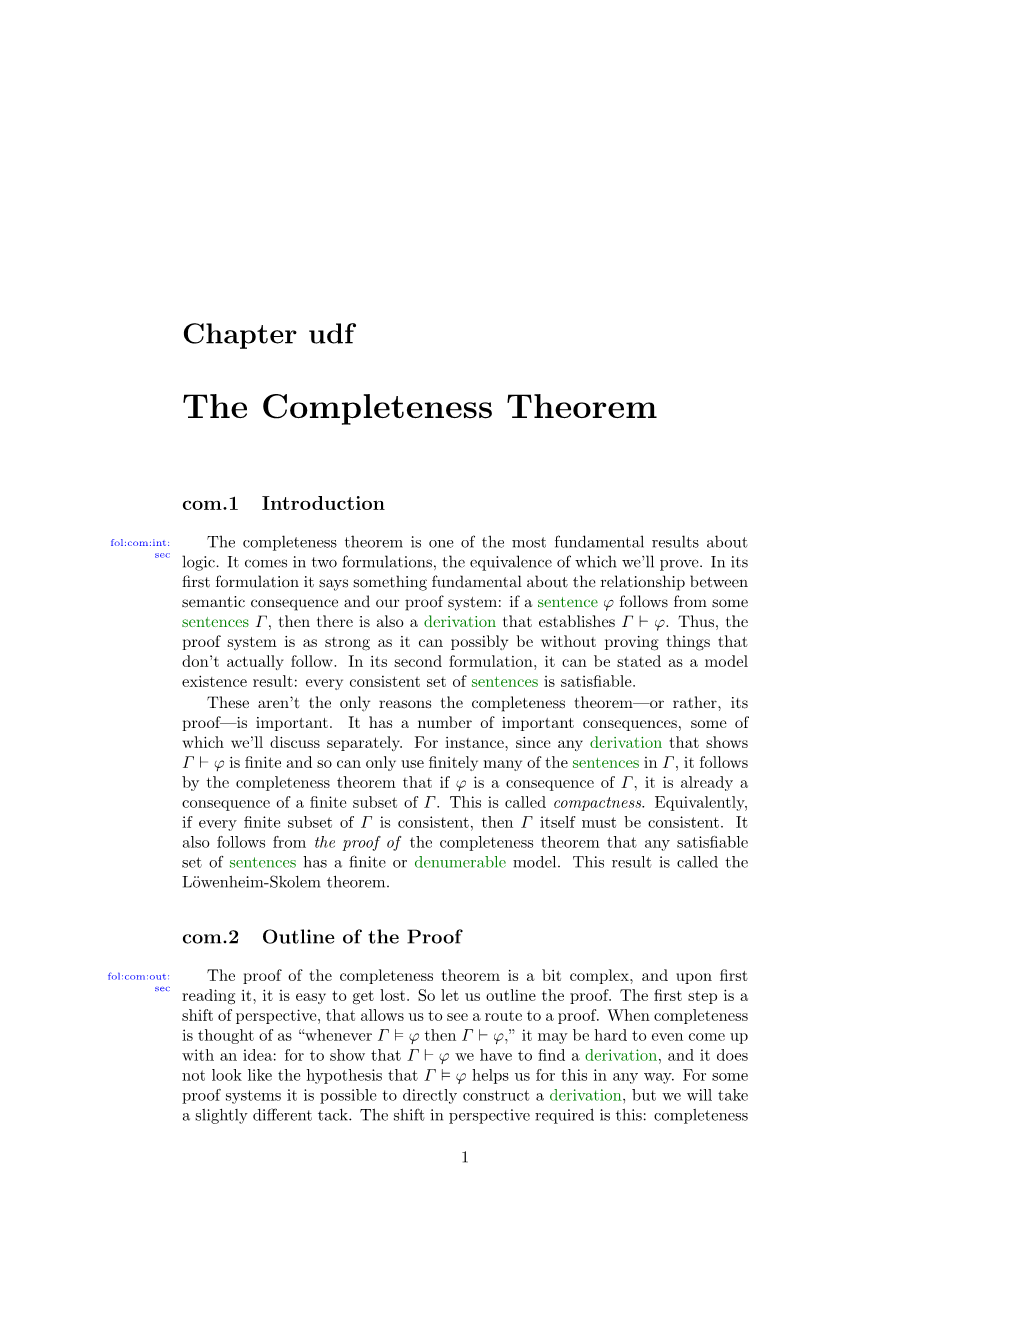 The Completeness Theorem